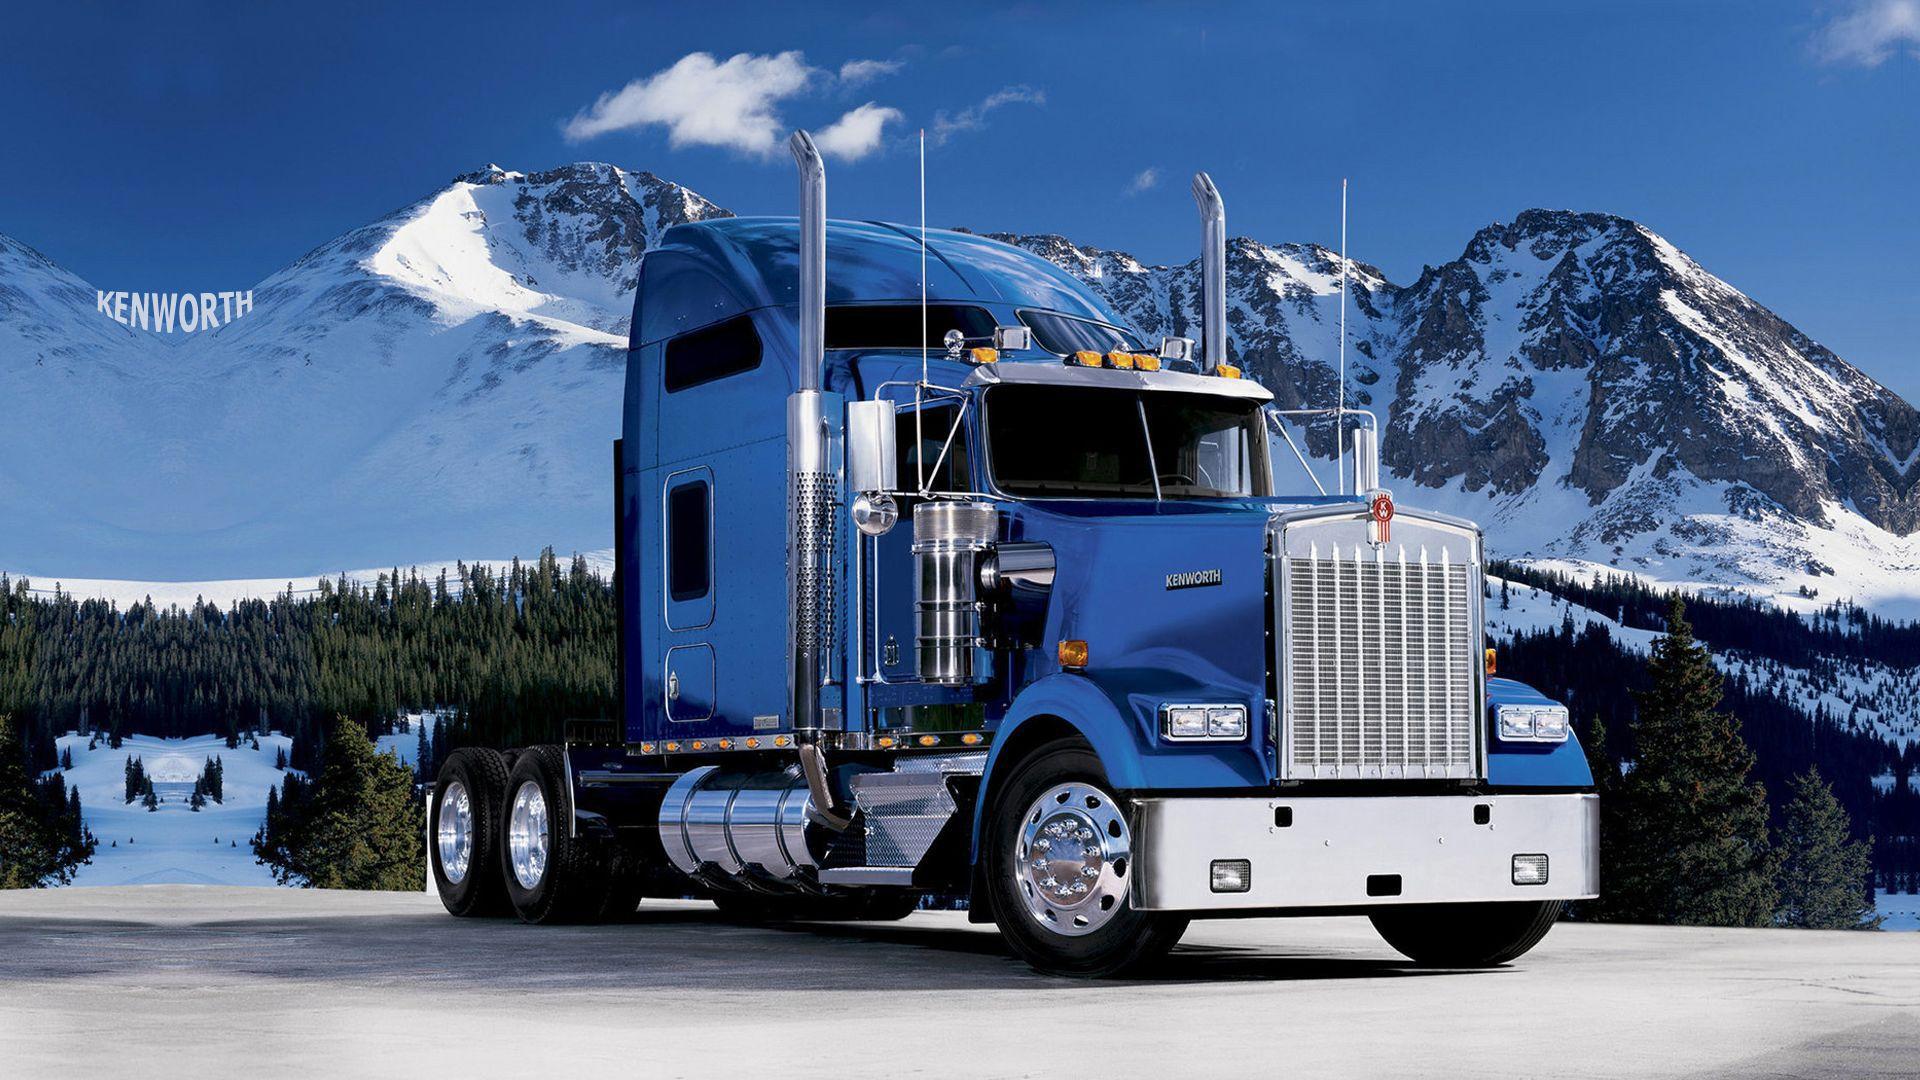 Trucking Photos Download The BEST Free Trucking Stock Photos  HD Images